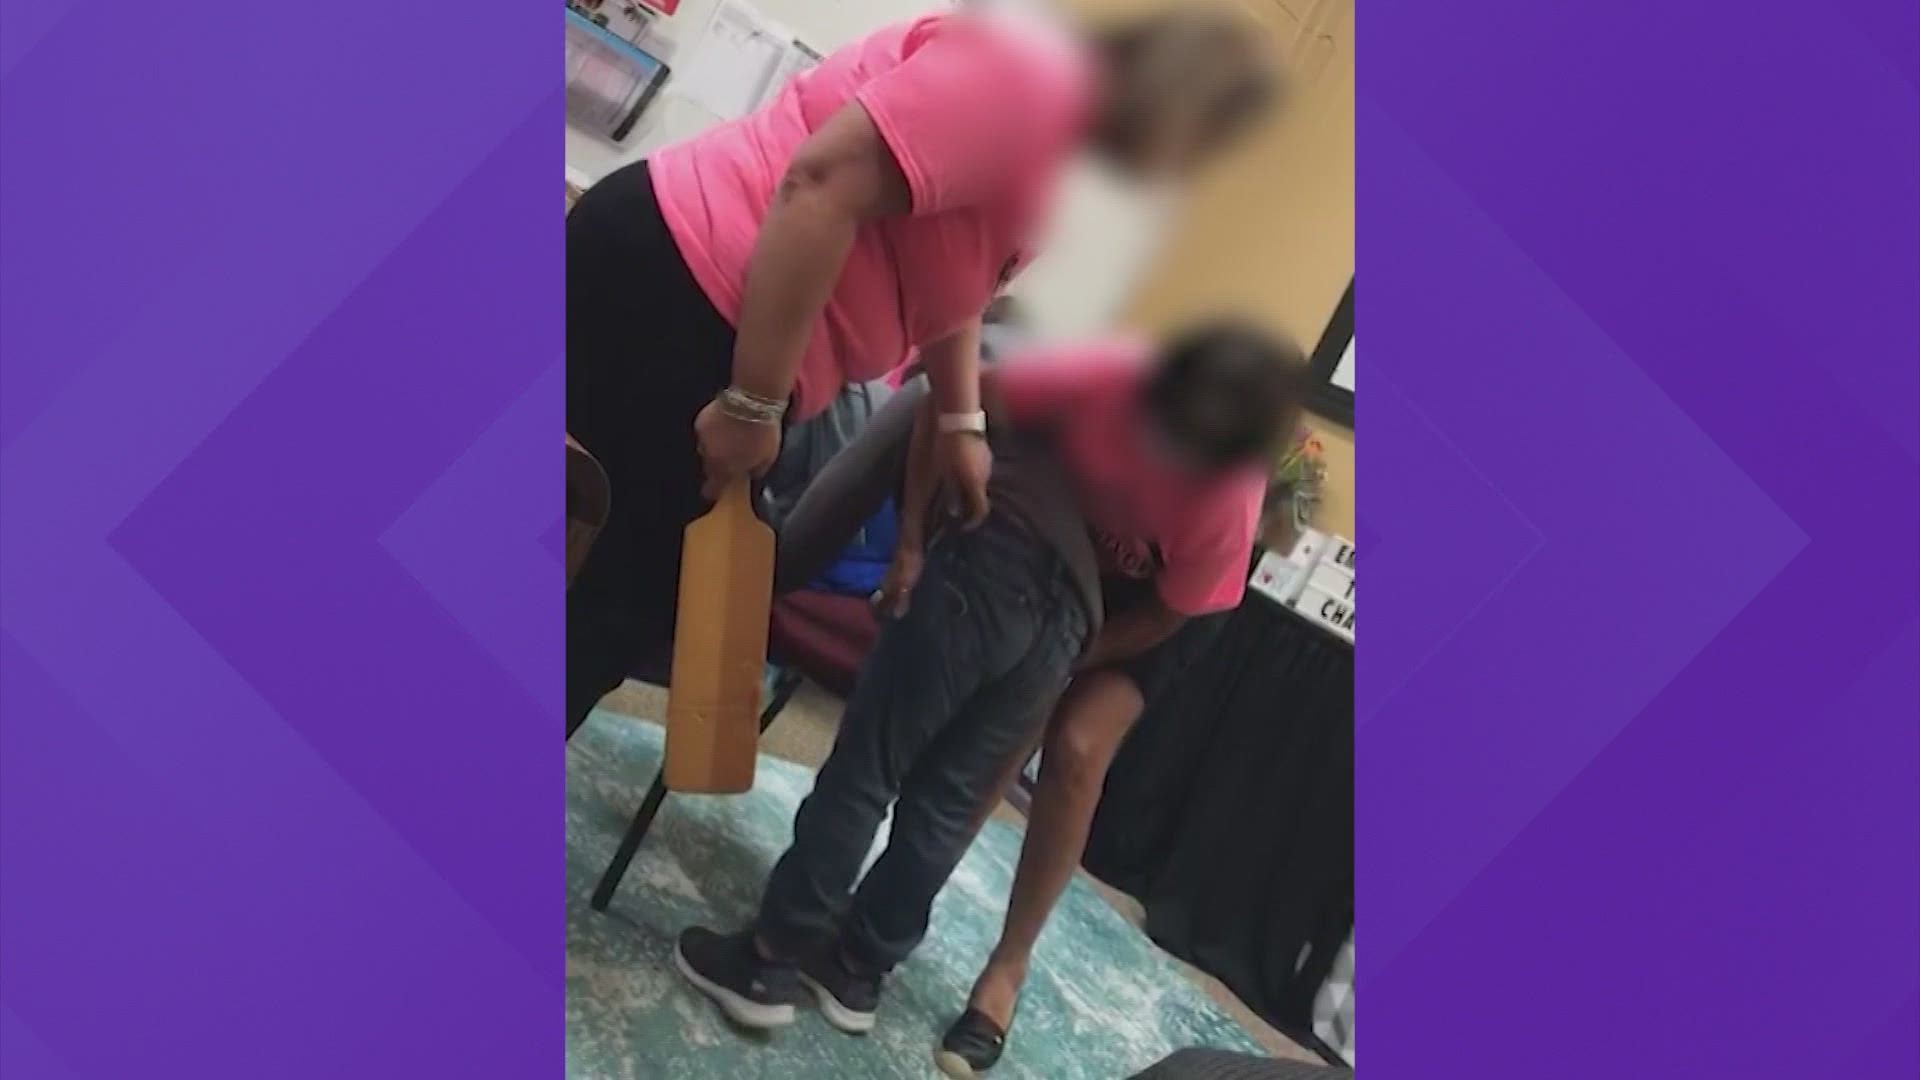 A student's mother recorded this incident on her phone last month in Florida. She doesn't speak English and she said she didn't give consent for her child to be hit.